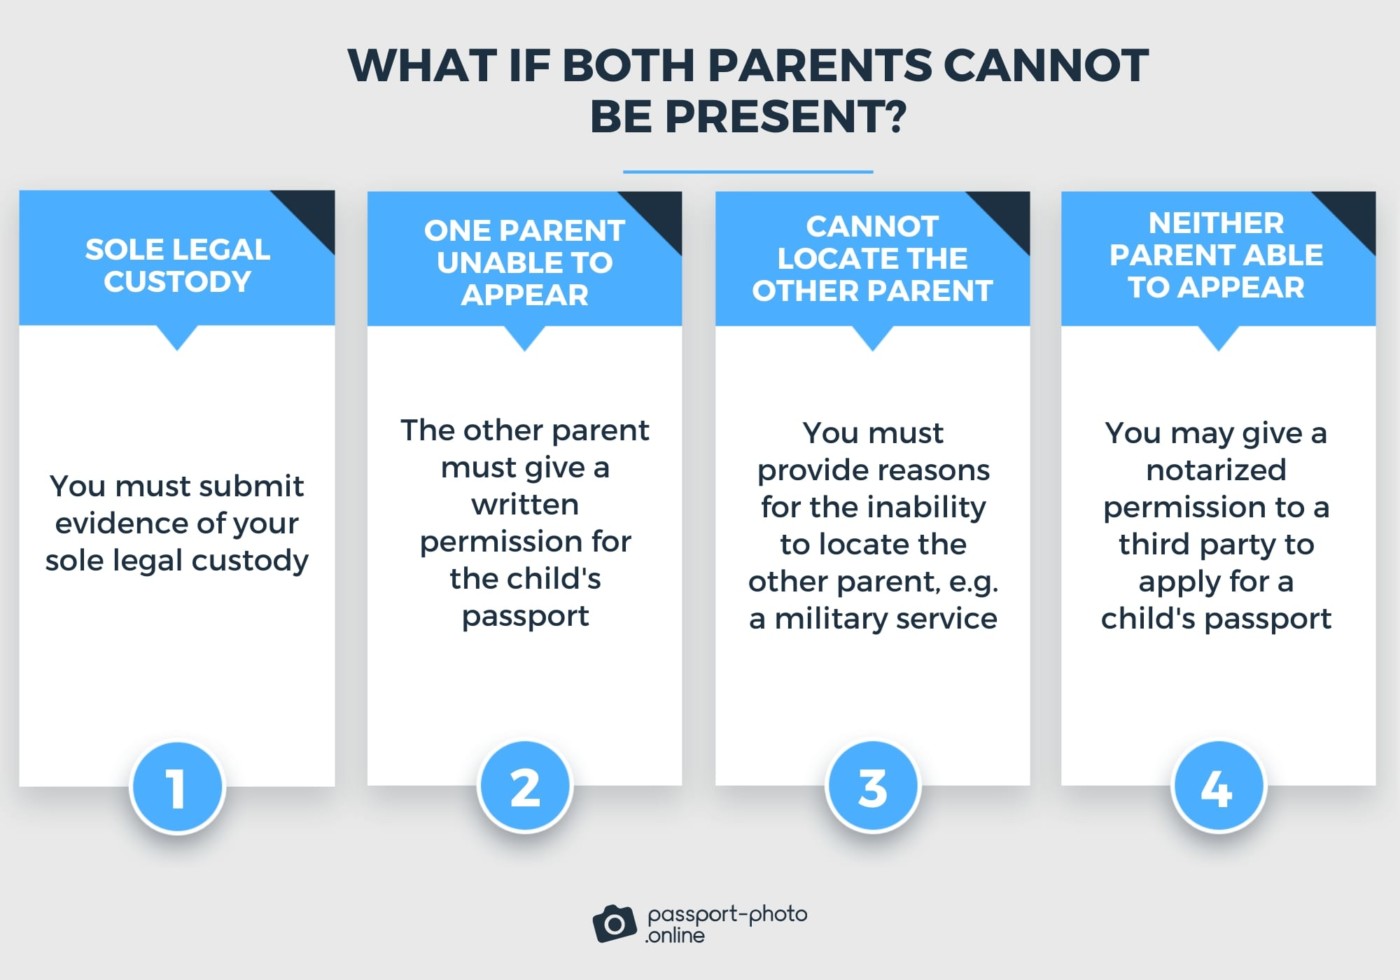 Table showing a child's passport application procedure if both parents cannot be present.